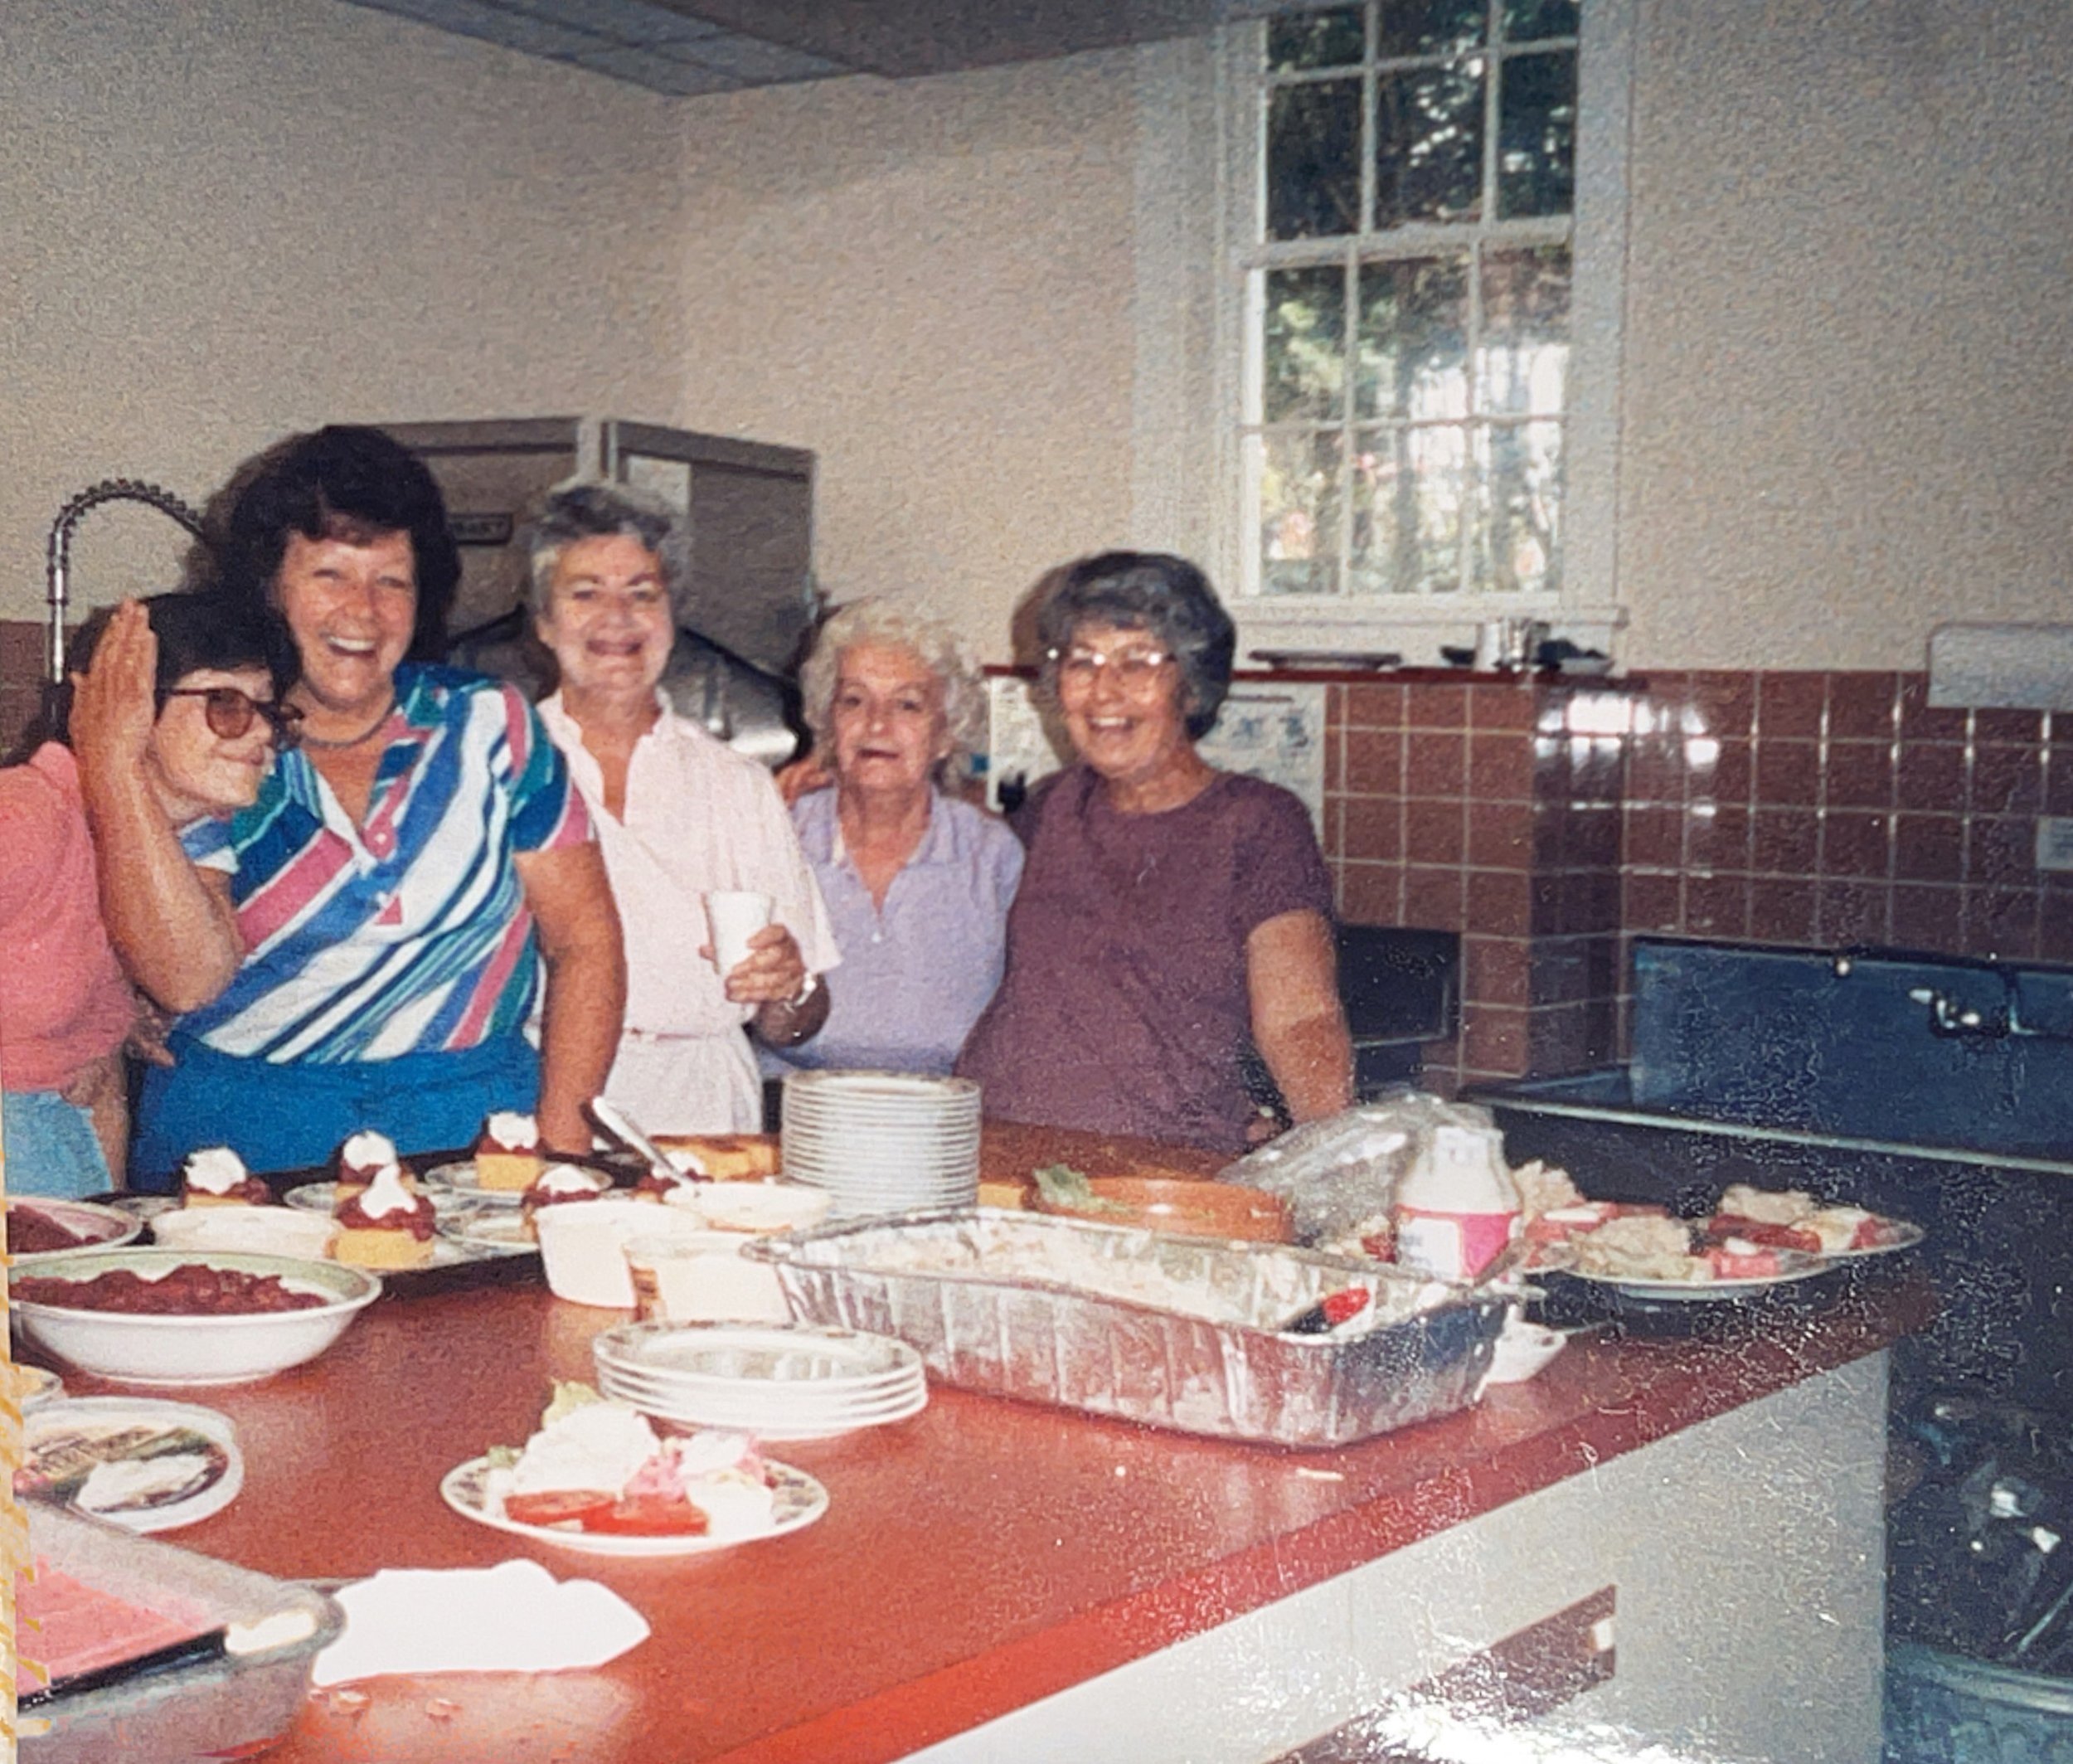 Luncheon Committee-l to r: ?, Jackie Balance, Helen Payne,?, Shirley Anderson